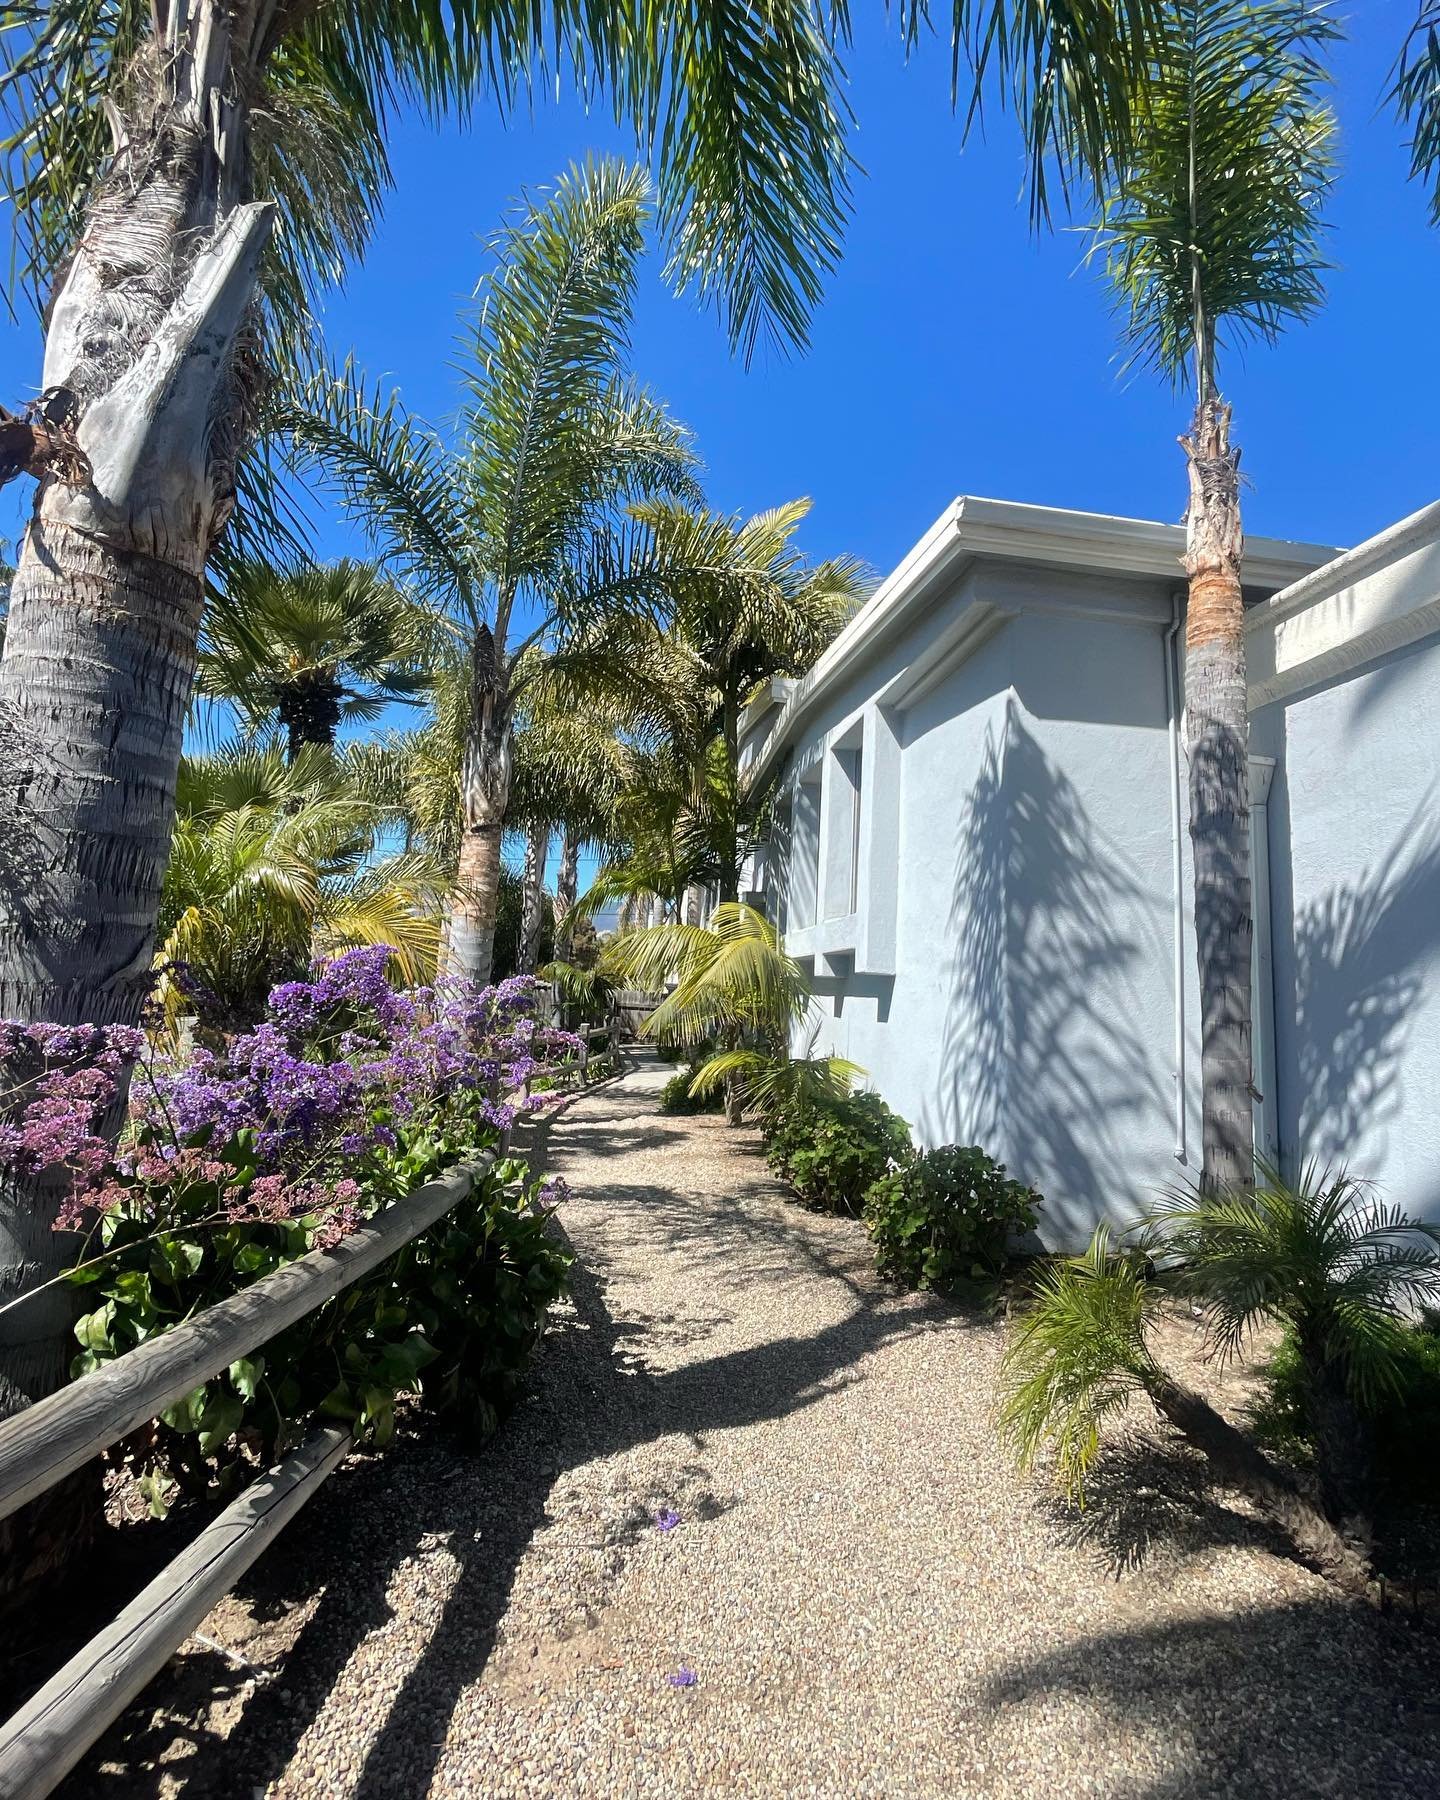 Just another beautiful day in Isla Vista ☺️ 

Have you noticed the greenery at our Embarcadero location? We love the flowers blooming this spring!! 🌼🪴